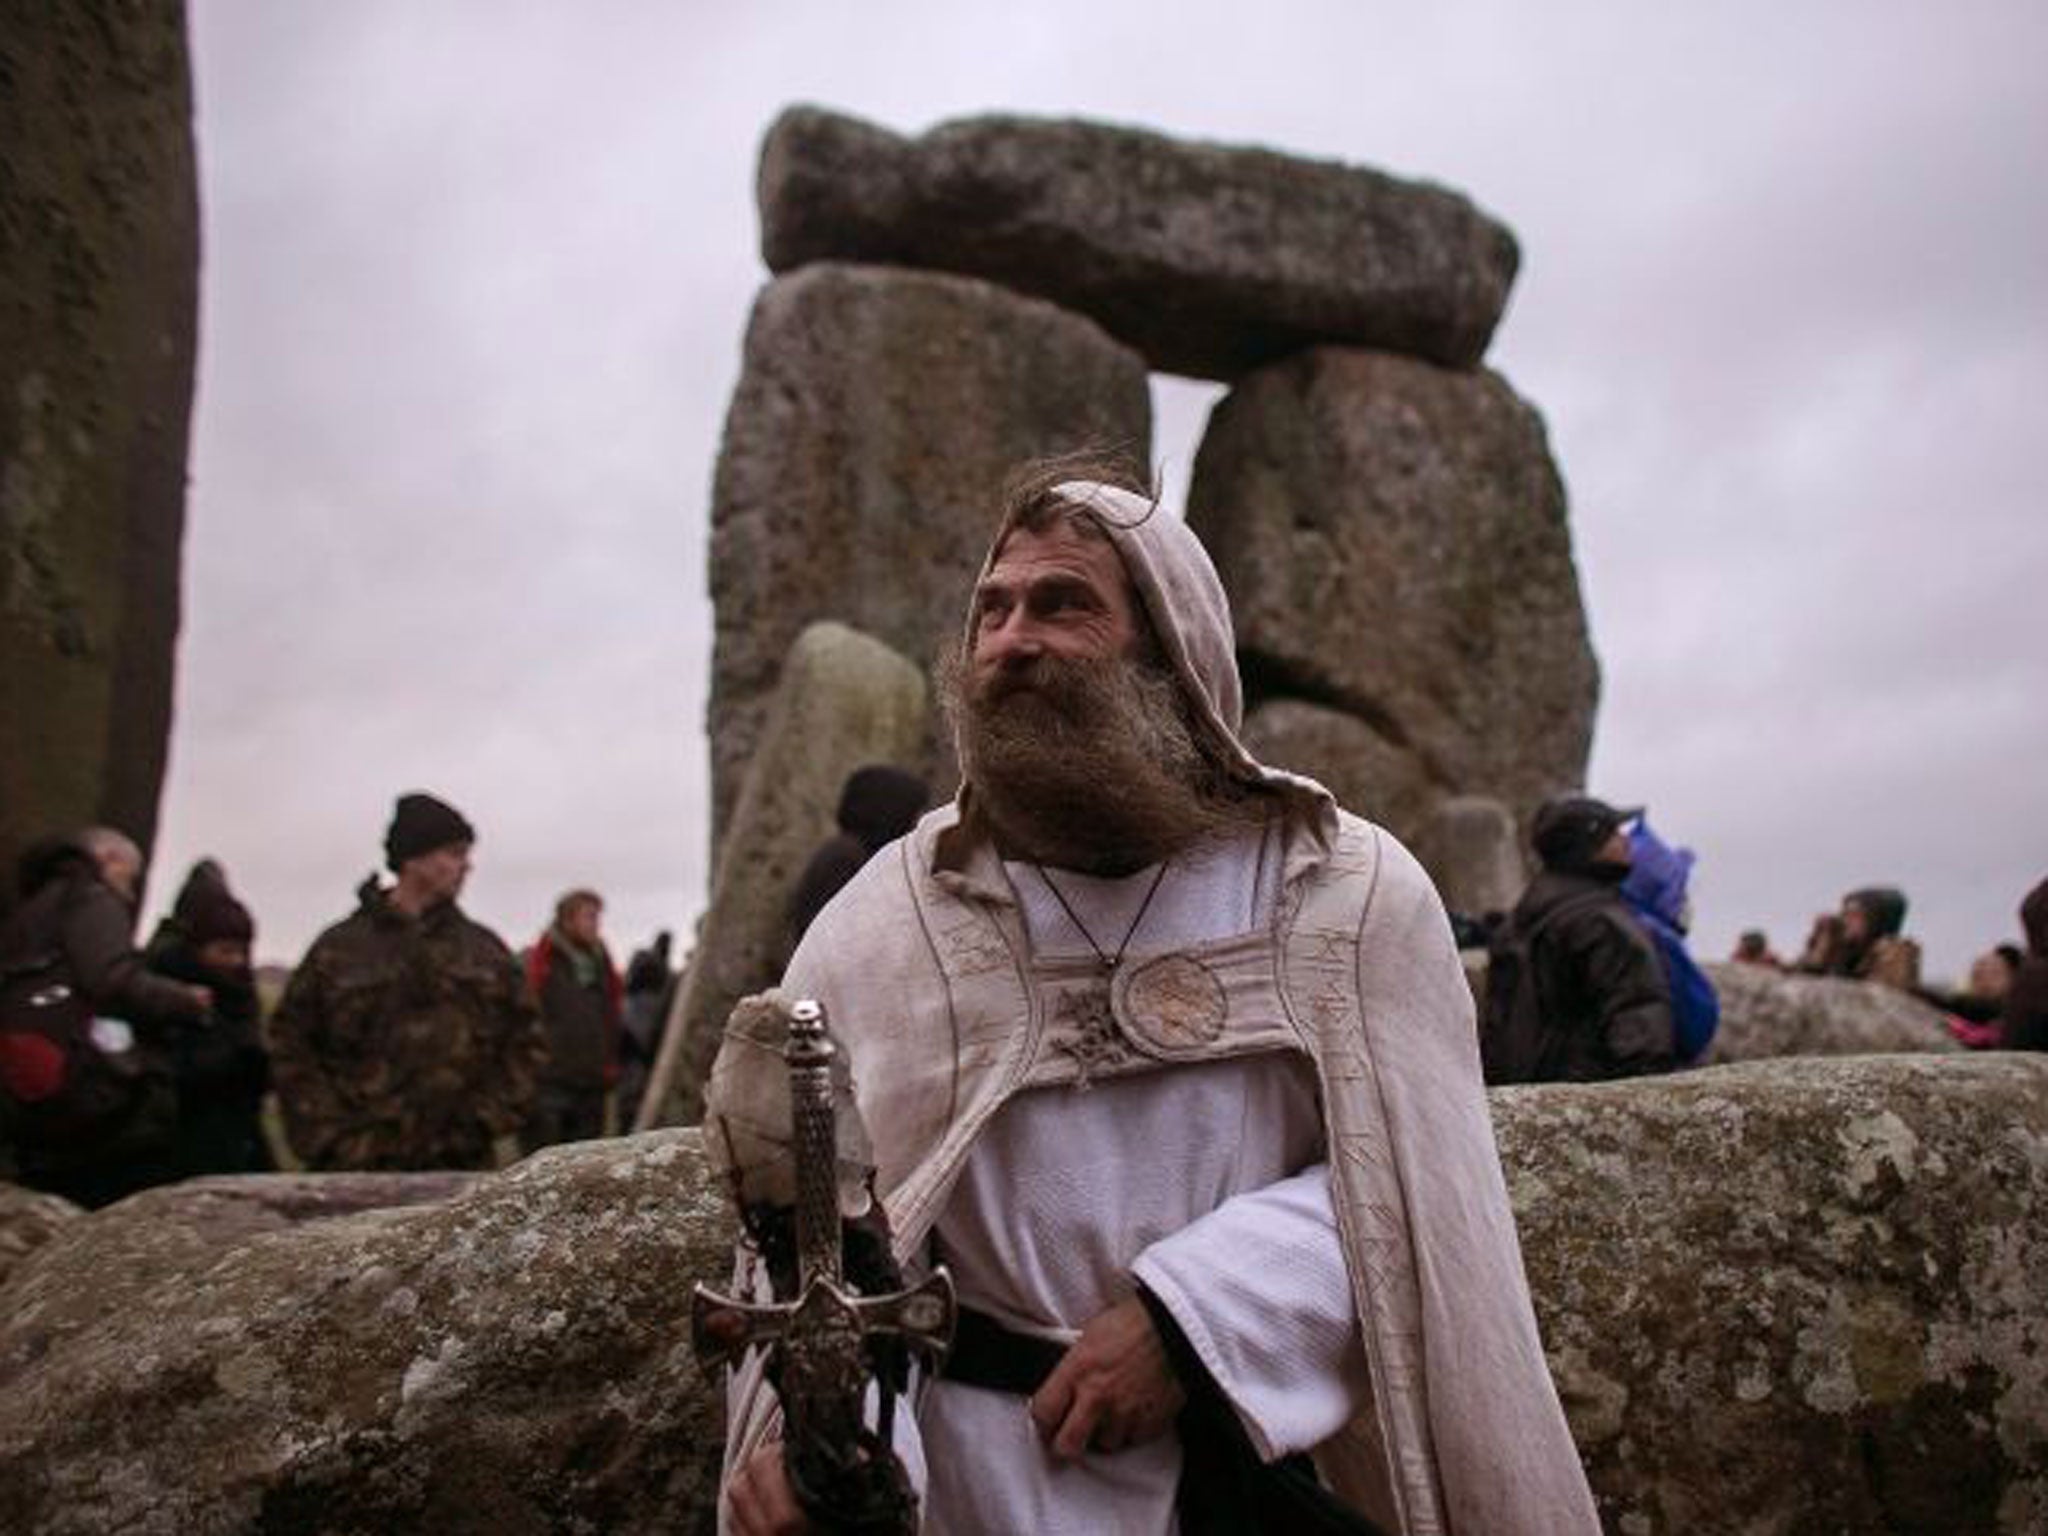 Druid Merlin poses for a photograph as druids, pagans and revellers gather, hoping to see the sun rise as they take part in a winter solstice ceremony at Stonehenge on December 21, 2013 in Wiltshire, England.